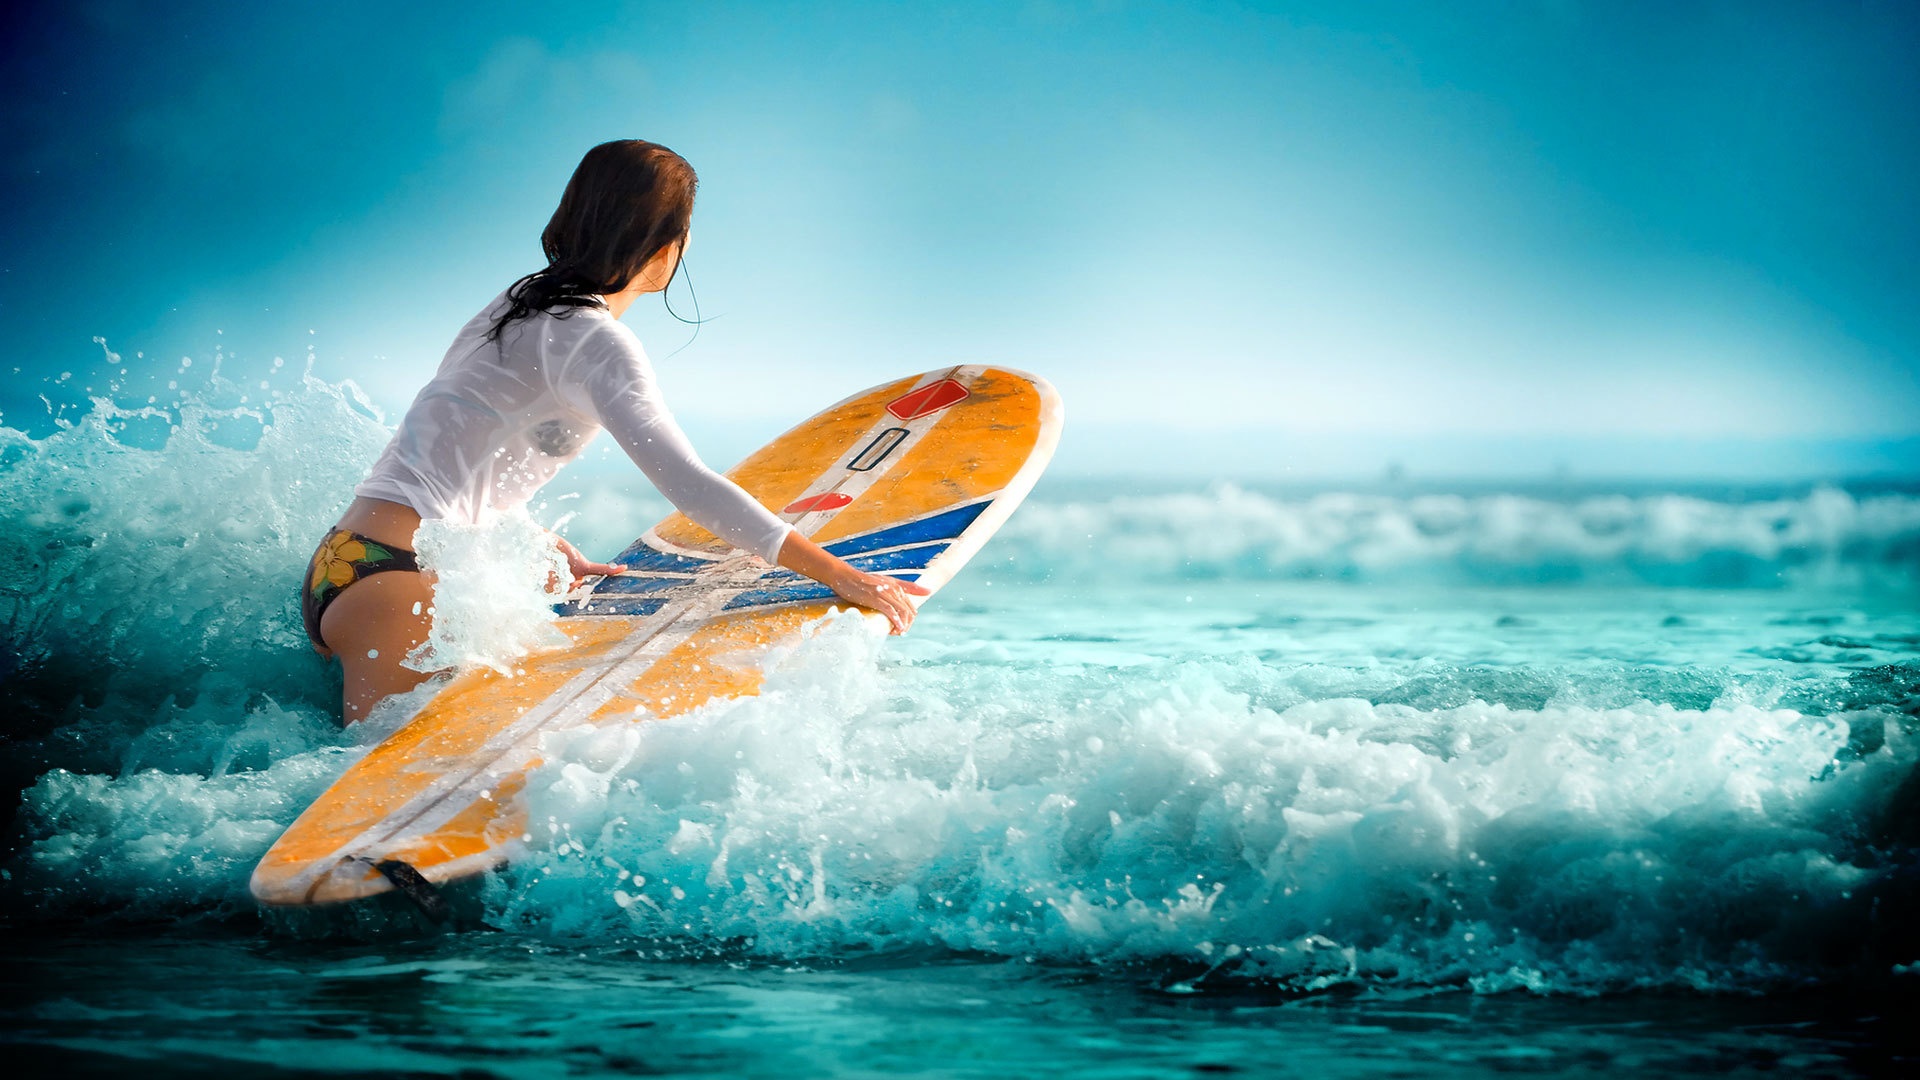 Surfing Wallpaper High Definition Quality Widescreen